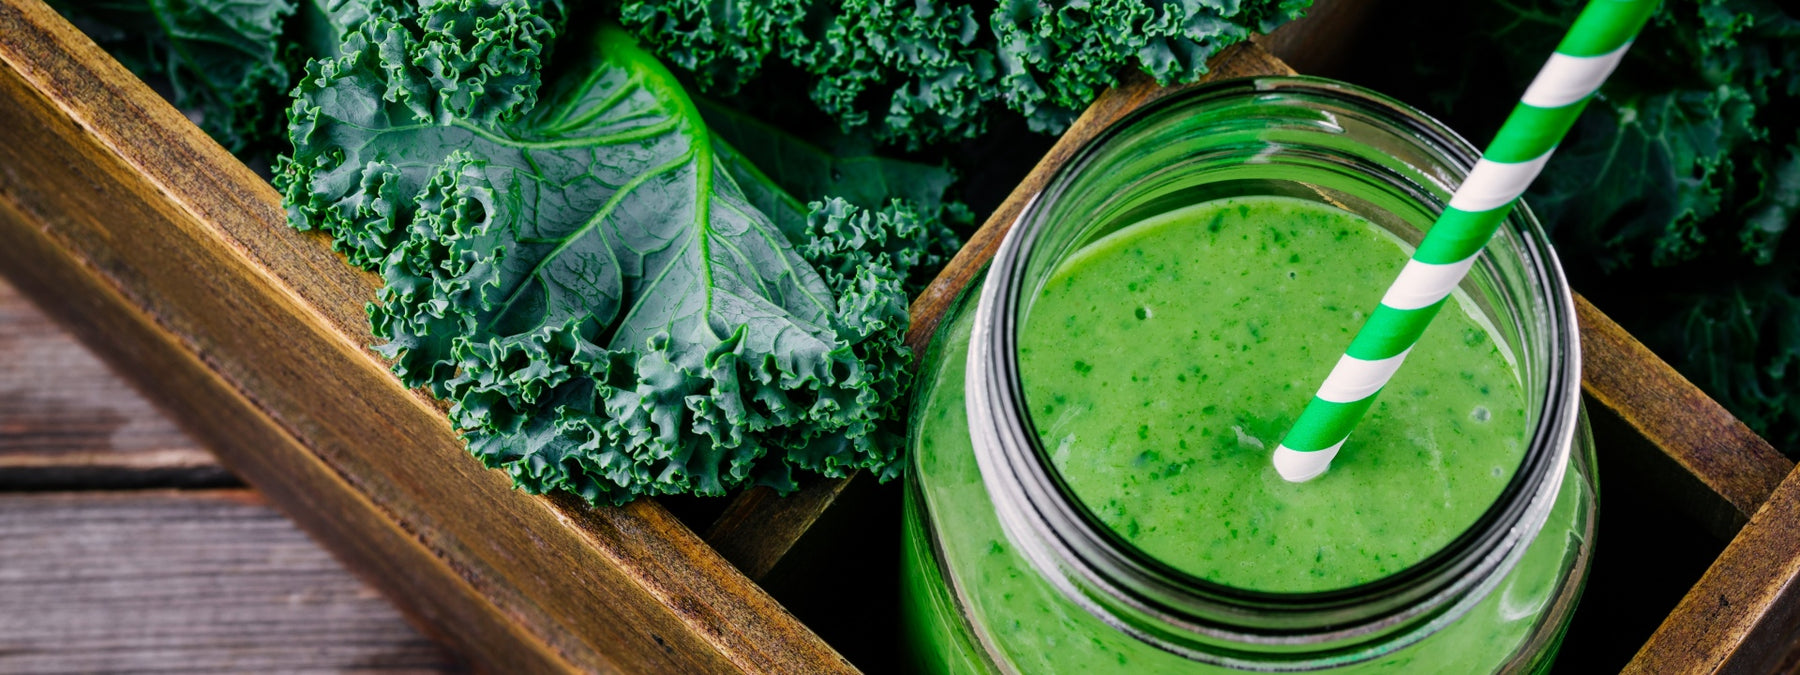 Kale and Machine Greens: The Ultimate Superfood Combination